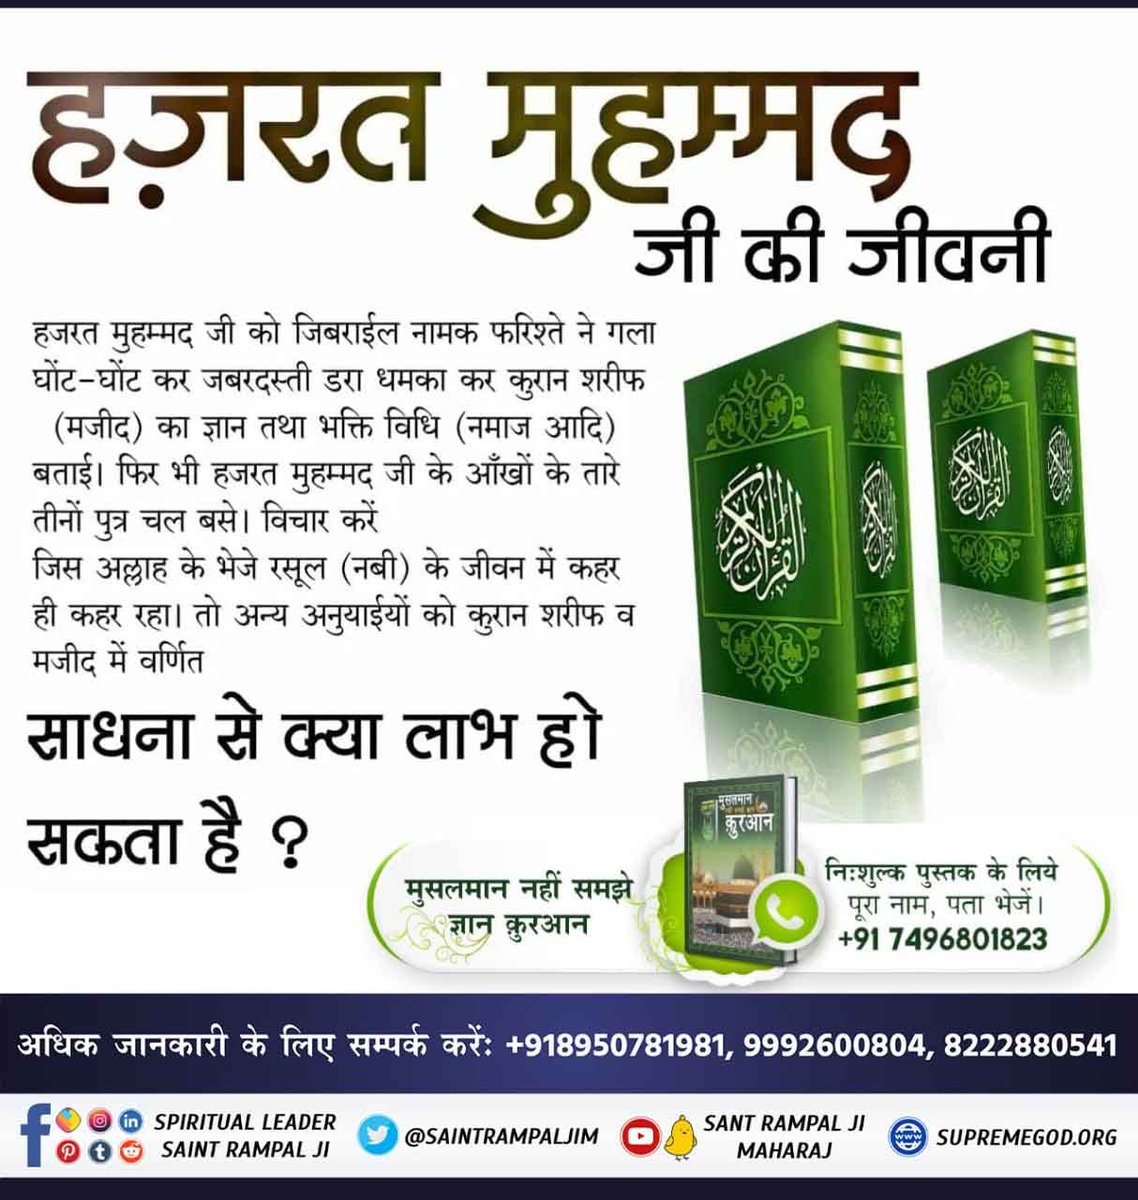 #TheLifeOfProphetMuhammad Biography of Hazrat Muhammad (Sallaahu Alaihi Wasallam, Author - Muhammad Inayatullah Subhani, page no. 307 has proof that Hazrat Muhammad ji has given the message to Muslims not to indulge in bloodshed and not even to take interest. Allah Kabir